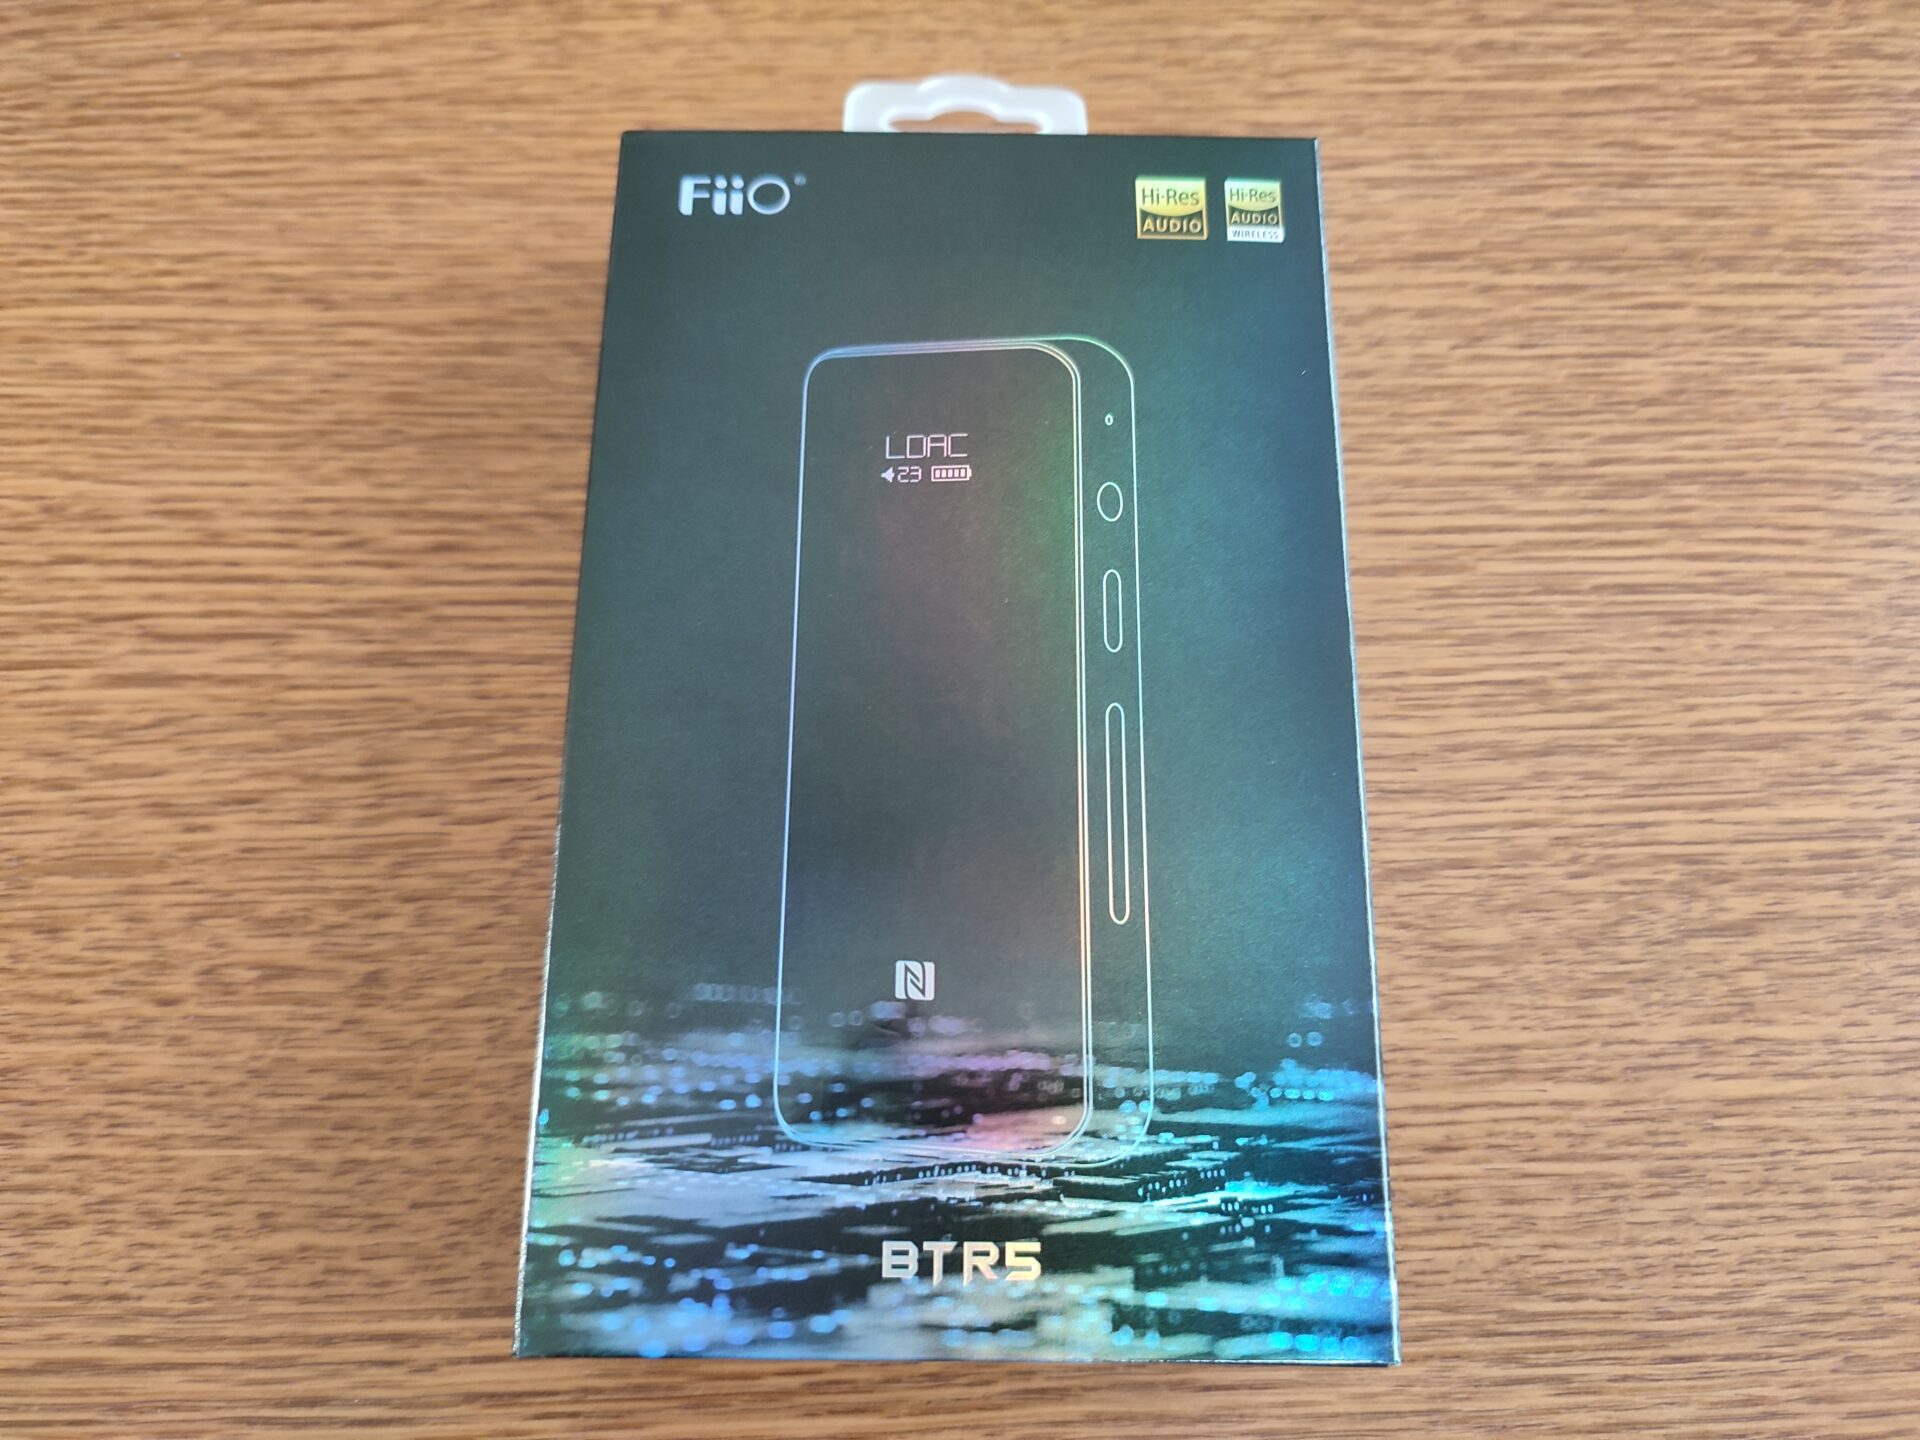 fiio-btr5-2021-package-front